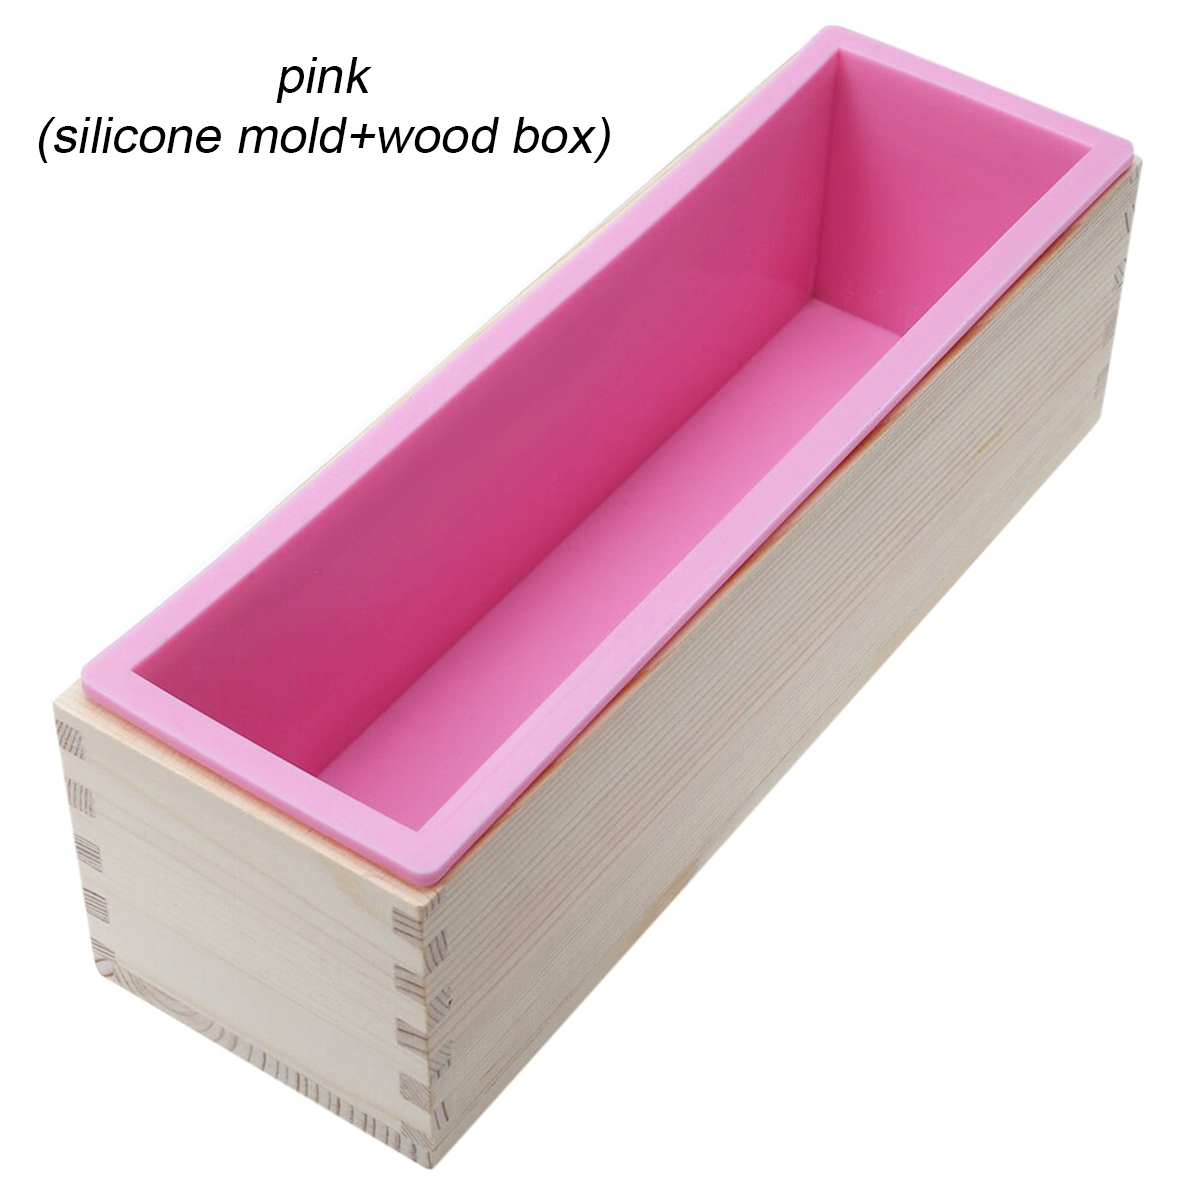 New-Wood-Loaf-Soap-Mould-with-Silicone-Mold-Cake-Making-Wooden-Box-Soap-1602226-6